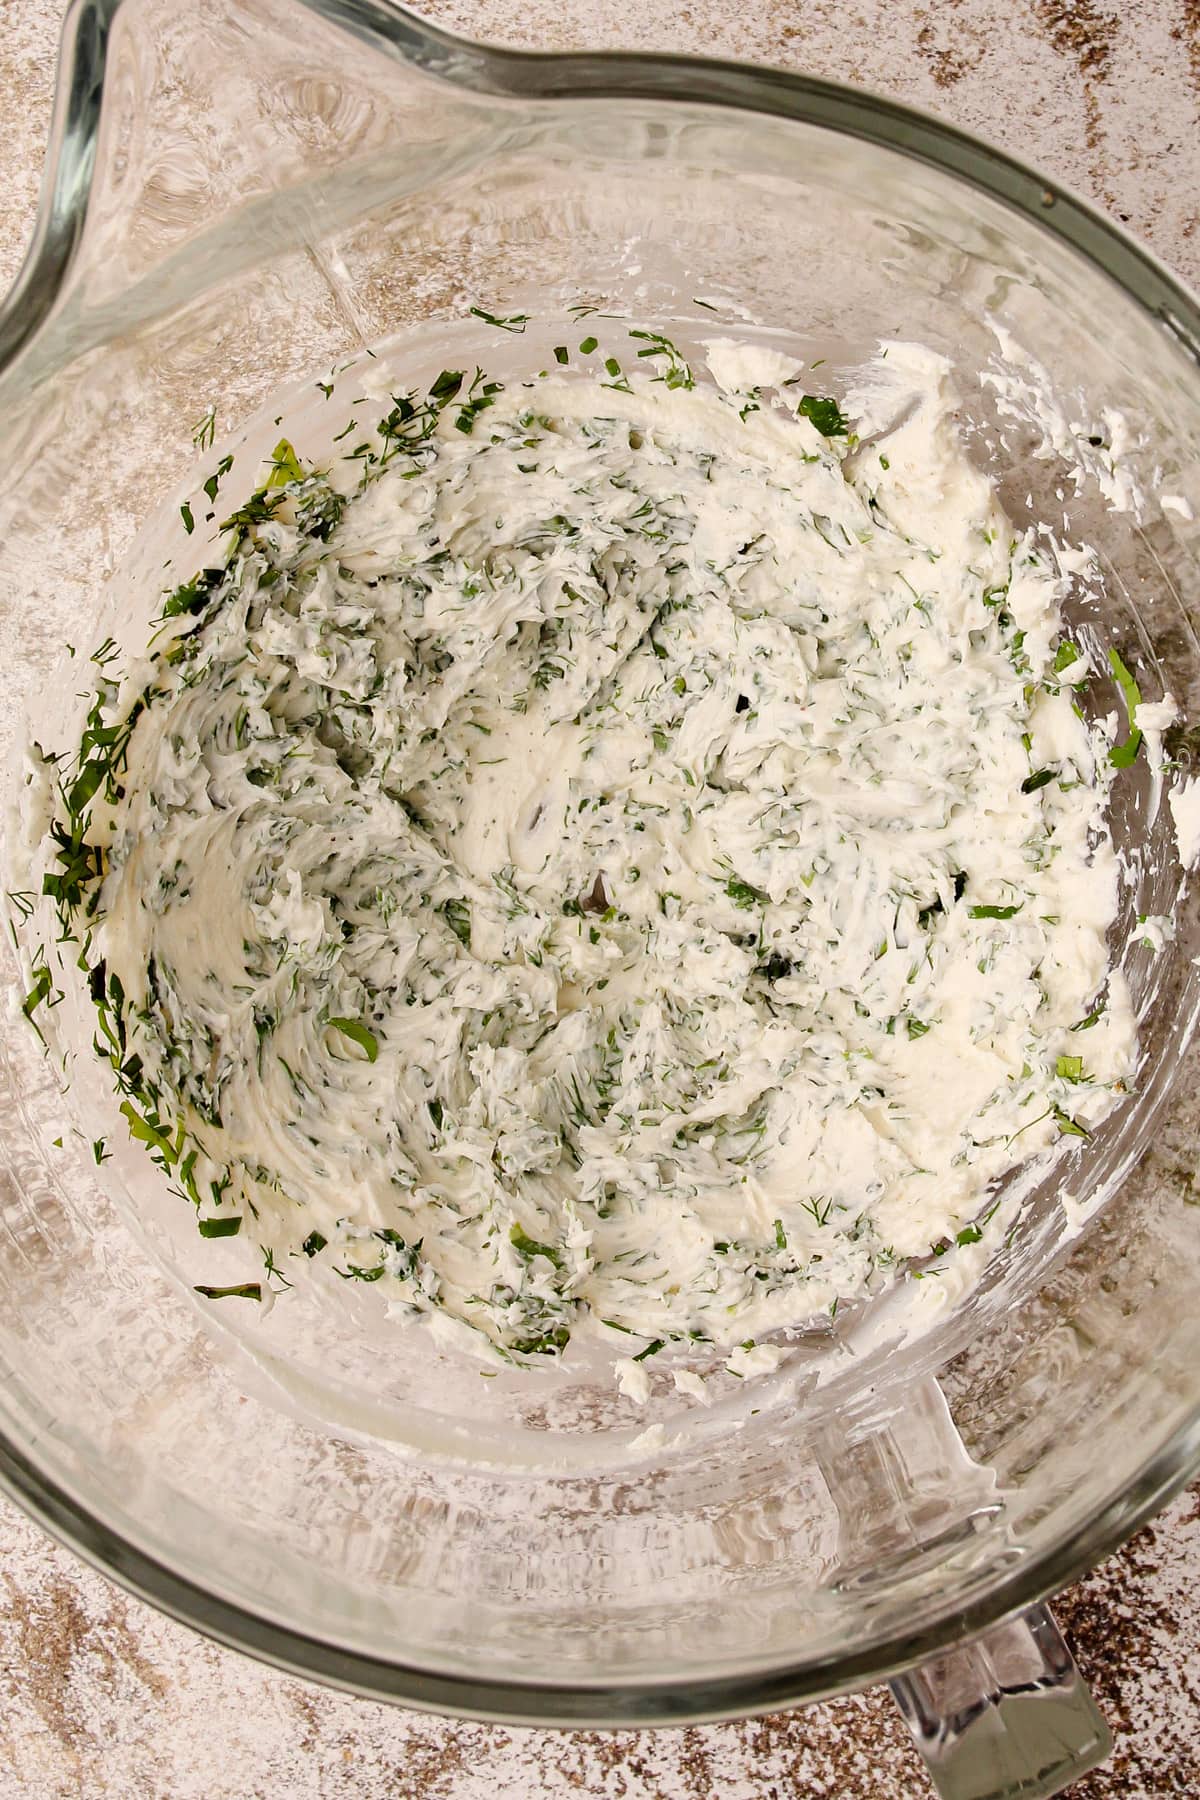 Goat cheese with herbs in a mixing bowl.